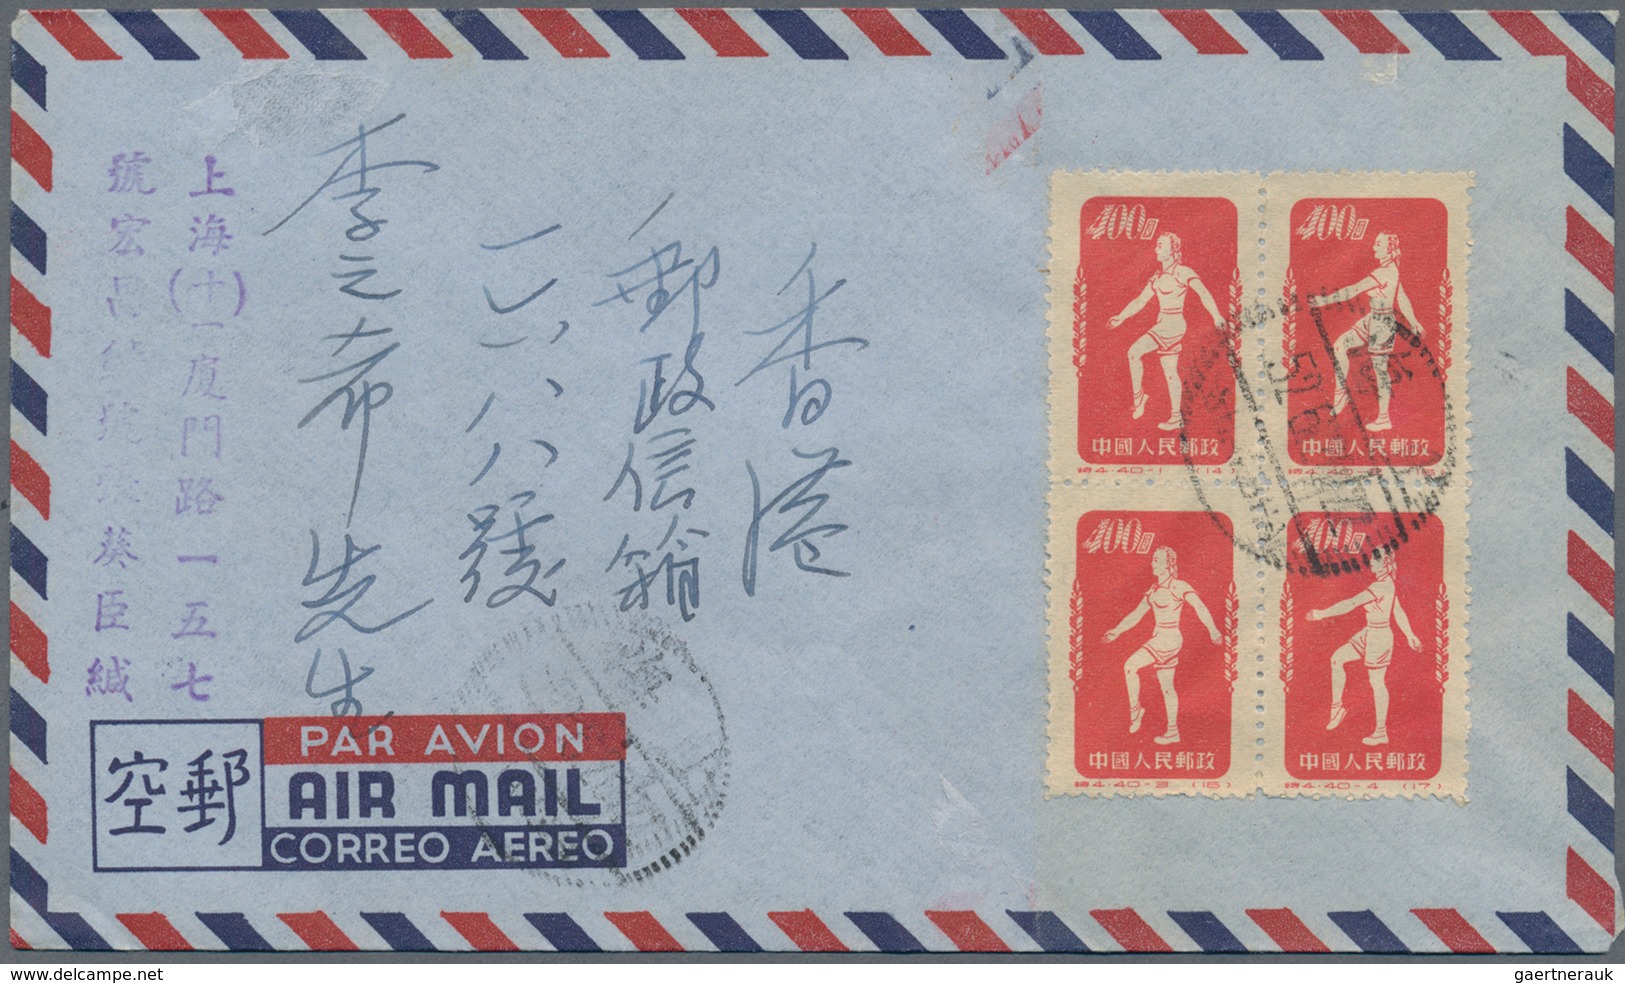 China - Volksrepublik: 1952, 10 covers addressed to Hong Kong, bearing the full set of Gymnatics by